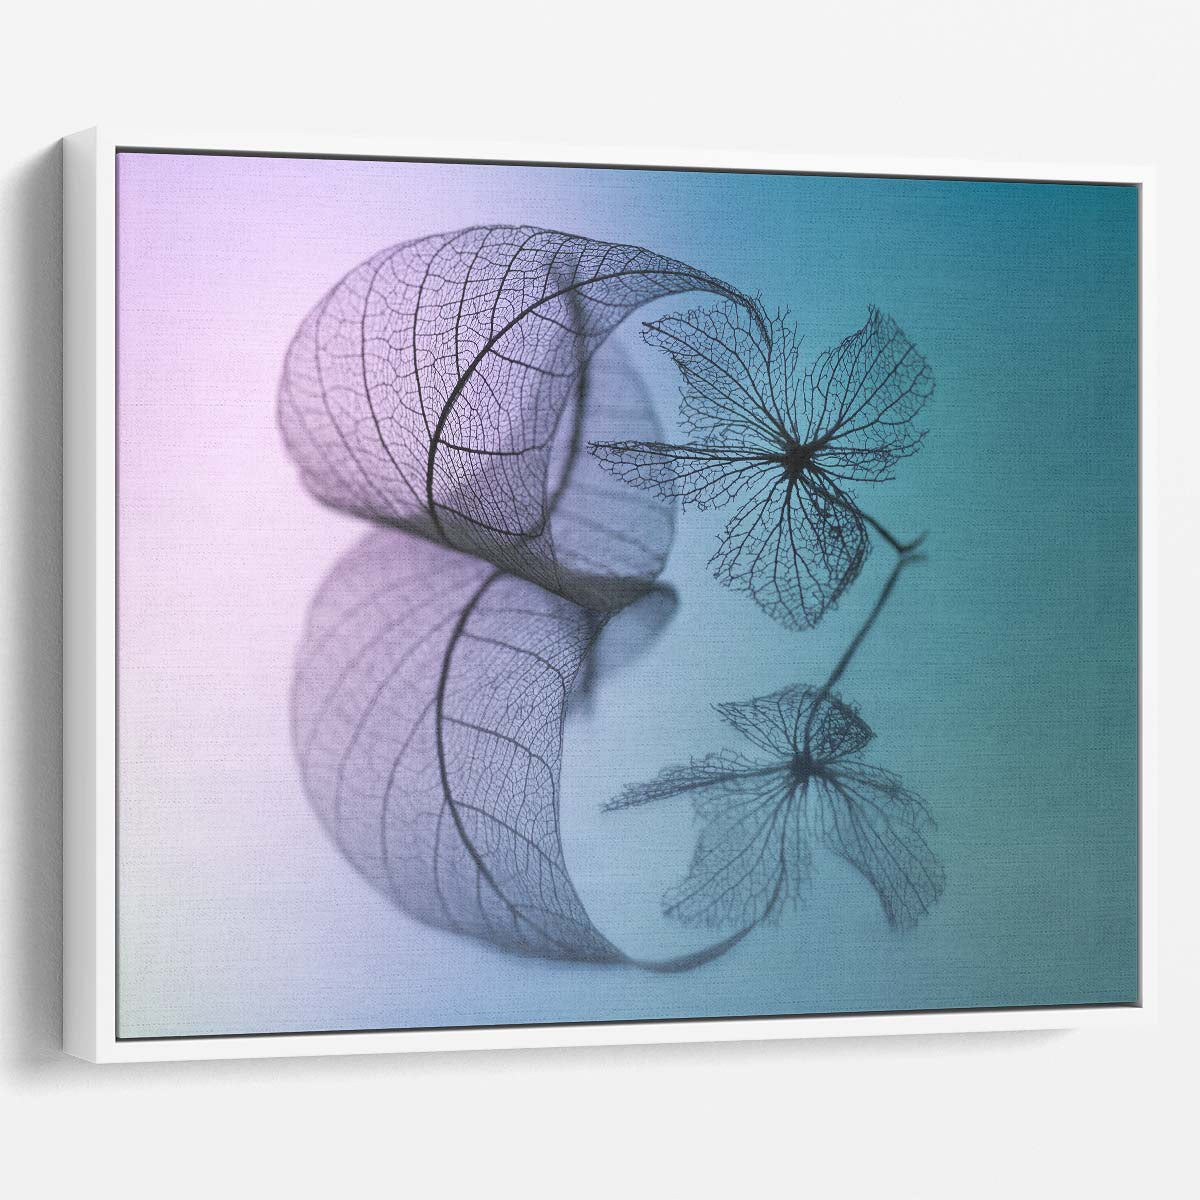 Vibrant Purple Floral Macro Minimalism Wall Art by Luxuriance Designs. Made in USA.